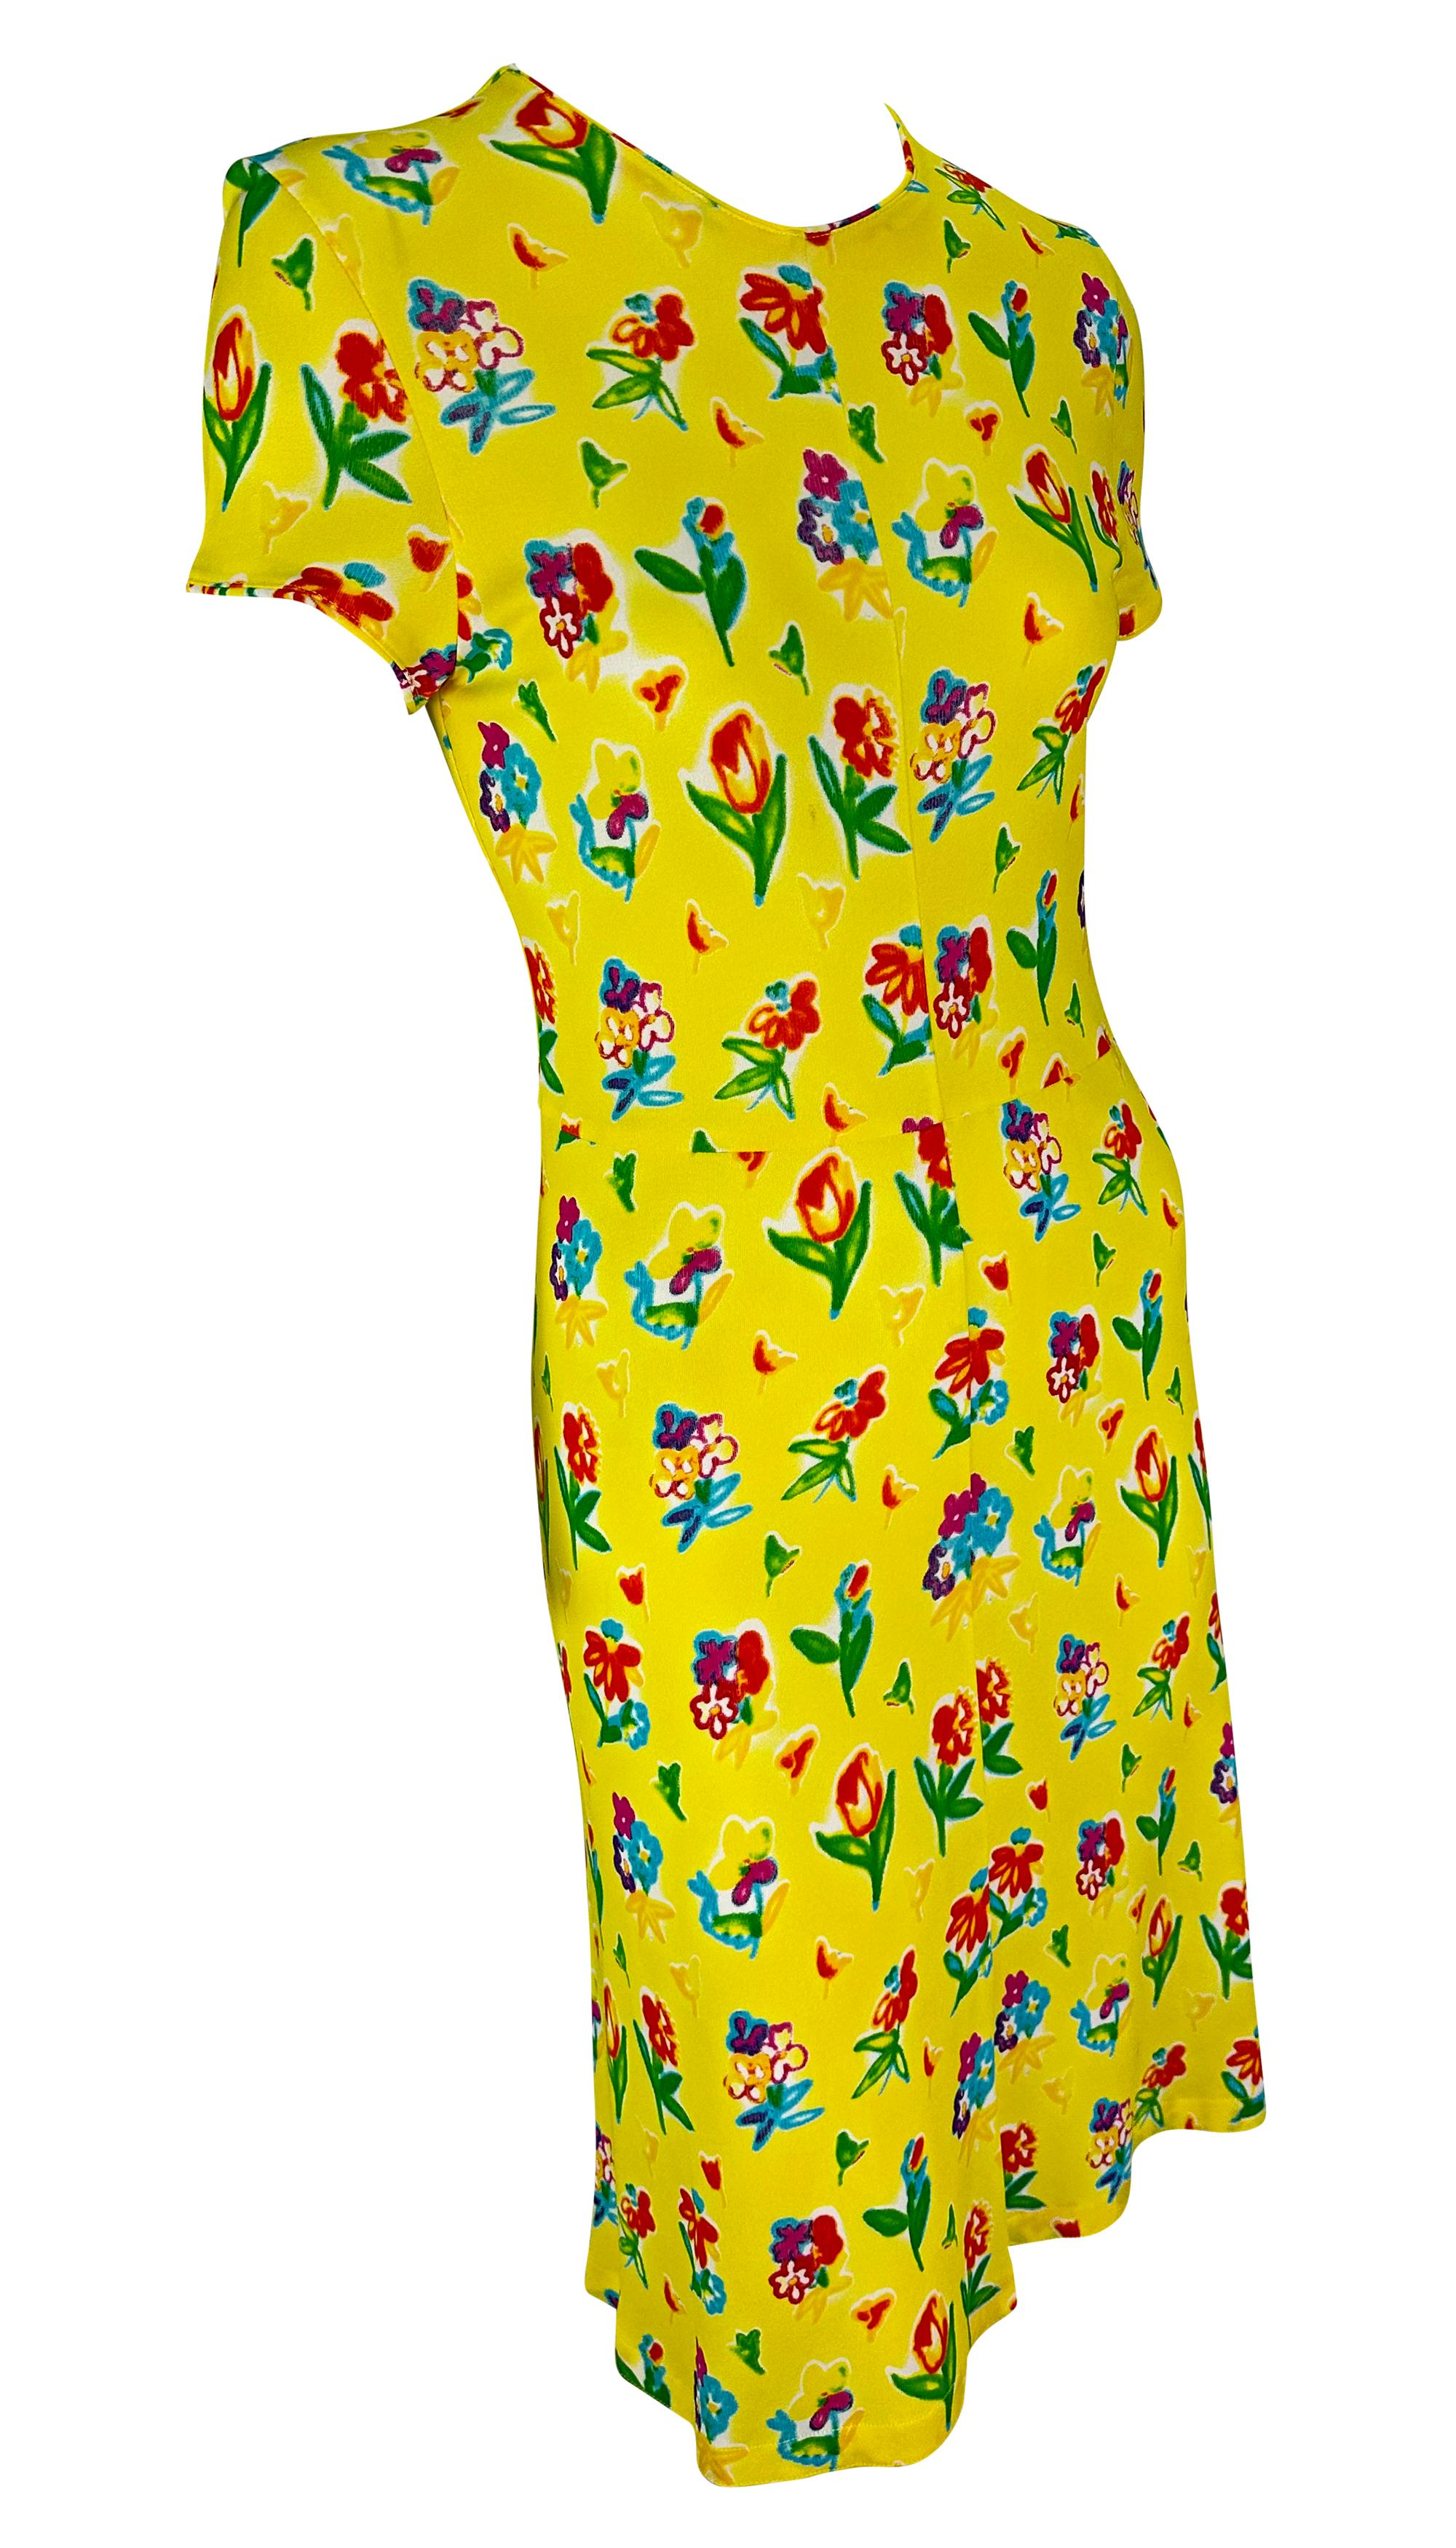 S/S 1996 Gianni Versace Yellow Floral Short Sleeve Viscose Midi Dress For Sale 3